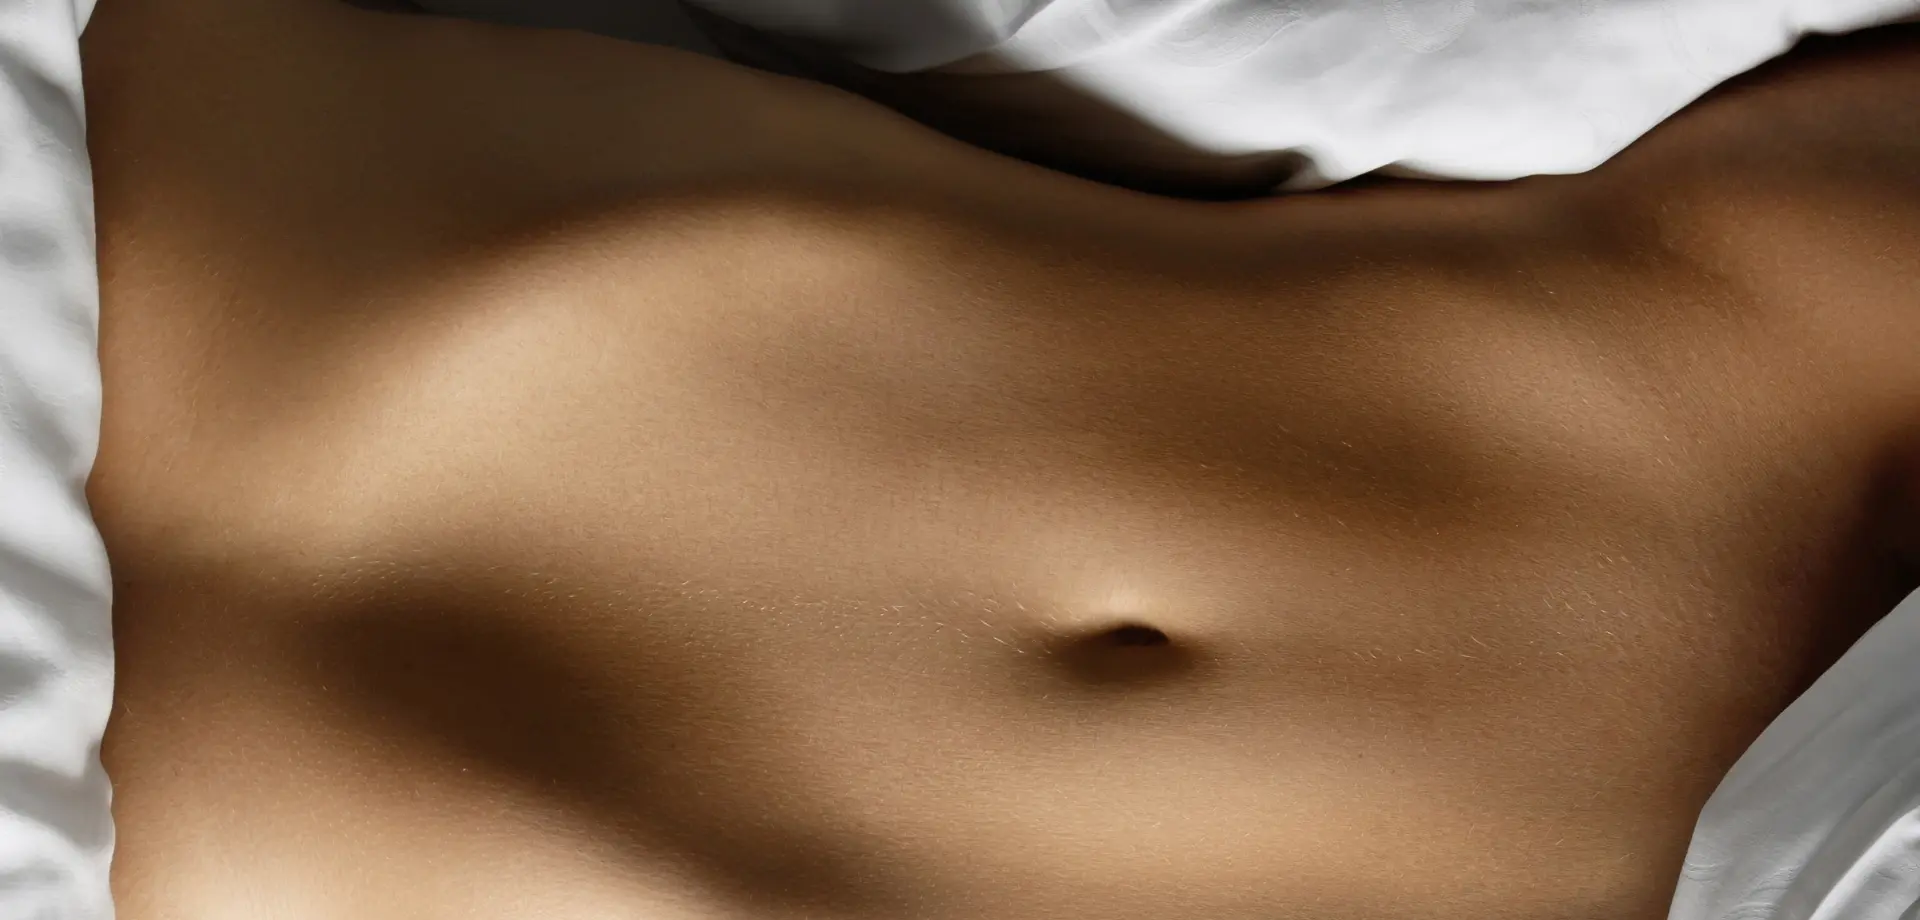 Tummy Tuck in Westchester, Long Island, & New York City (NYC